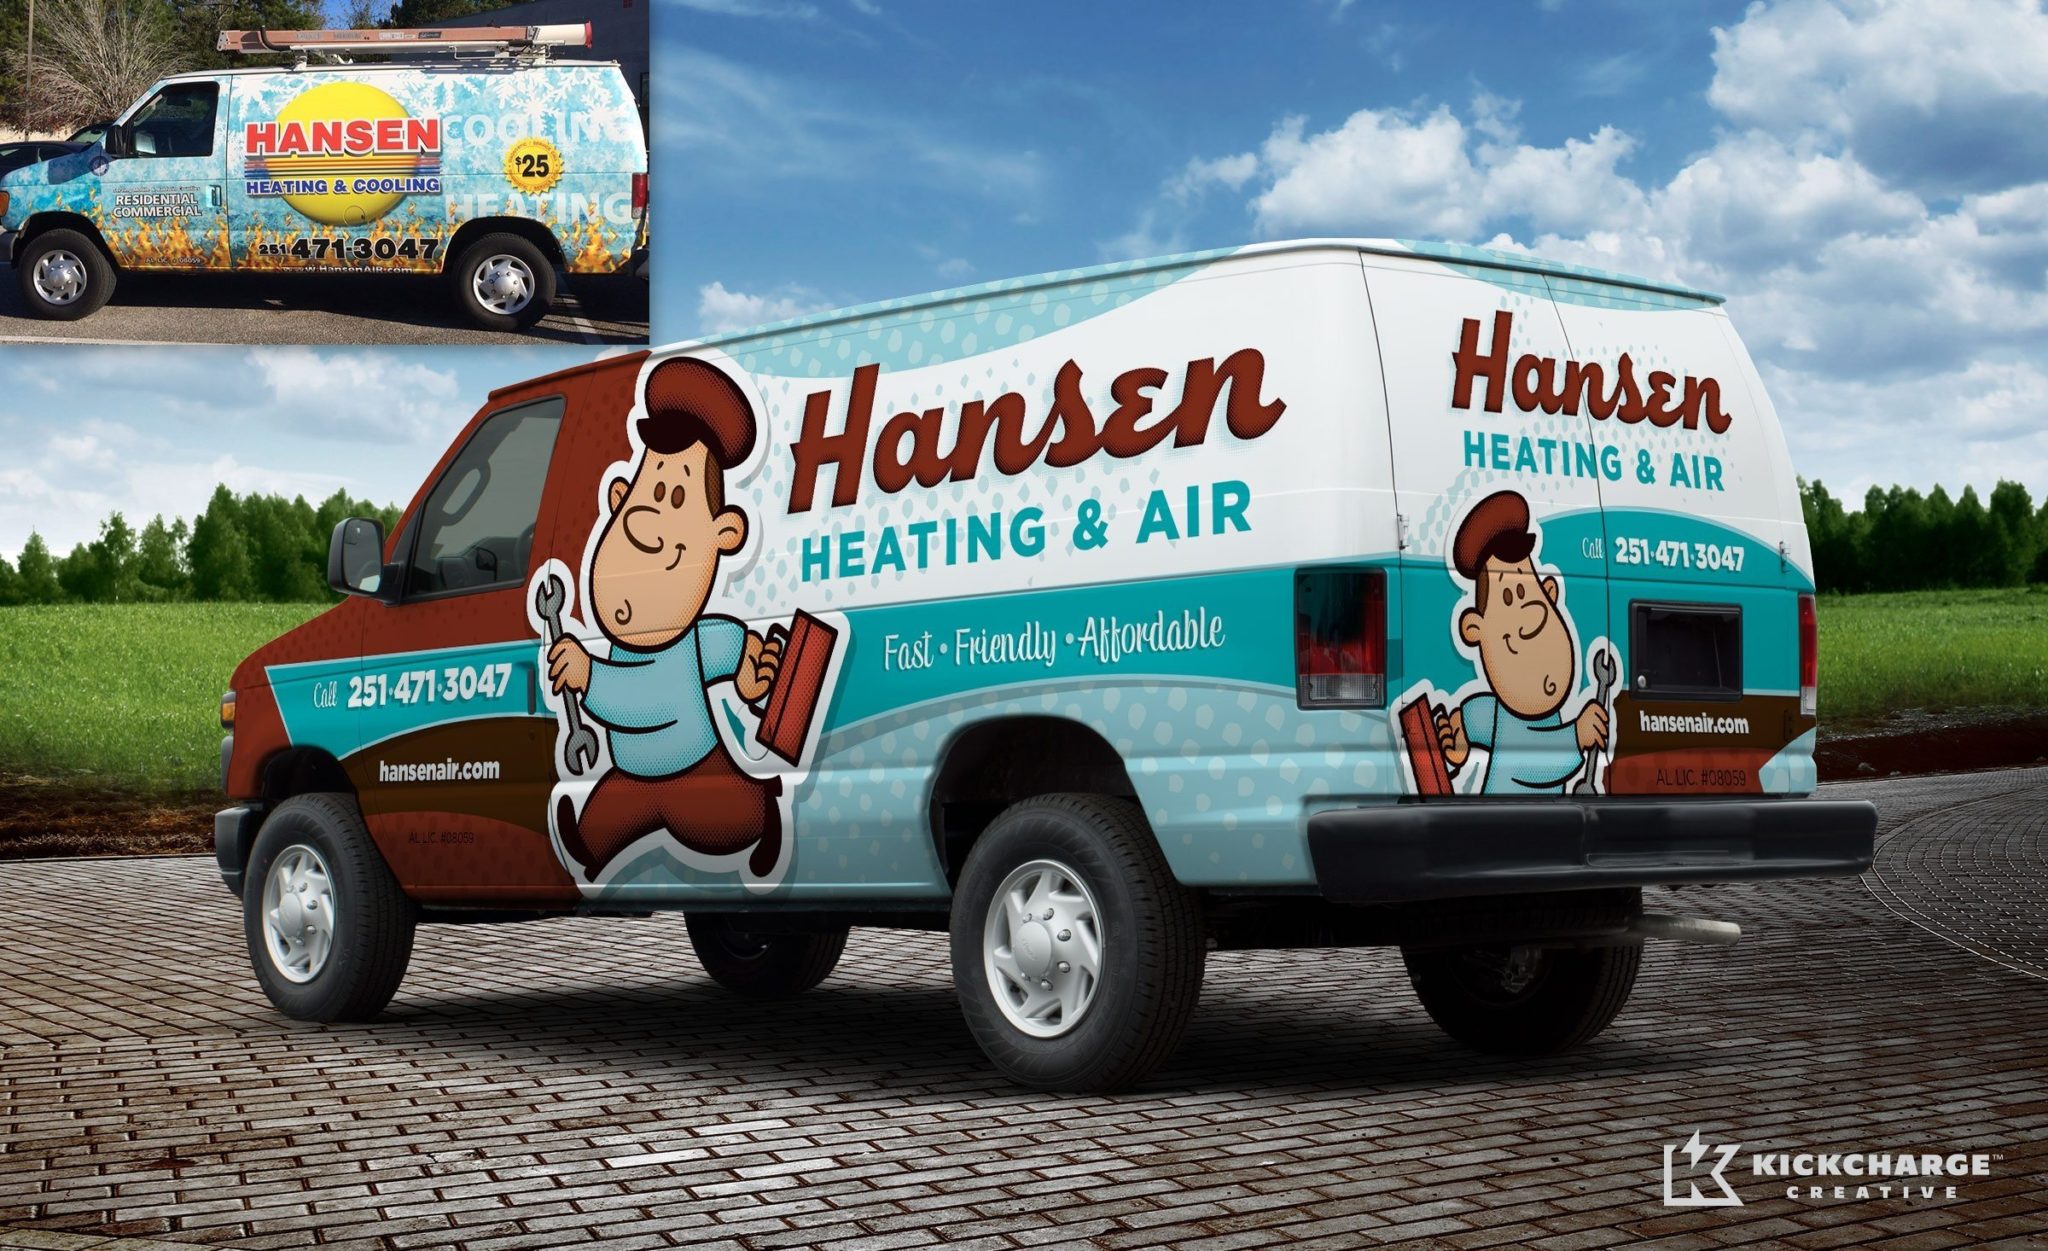 Hansen Heating & Air - Before & after Retro-themed truck wrap design and fleet branding for a heating and air conditioning contractor in Mobile, AL.